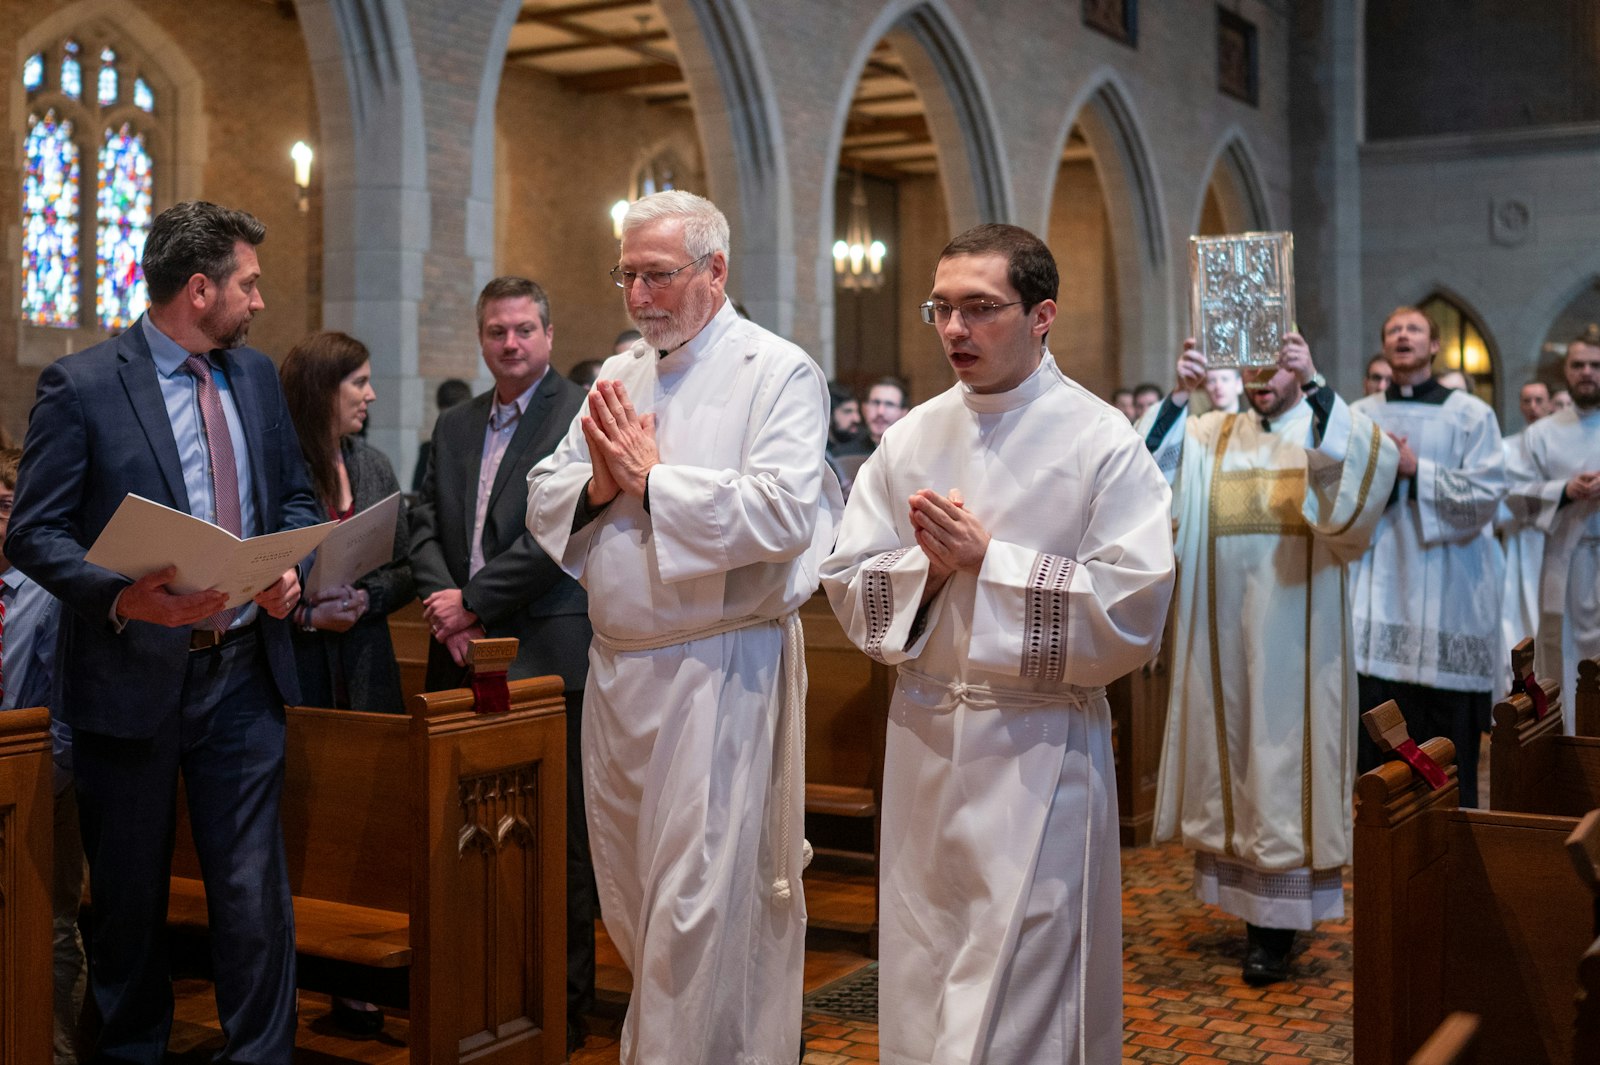 Deacons Bruen, left, and Schroder, right, will spend the next year of their formation ministering at the altar, proclaiming the Word of God, performing baptisms, funerals and weddings, and practicing works of charity, Bishop Cepeda said.